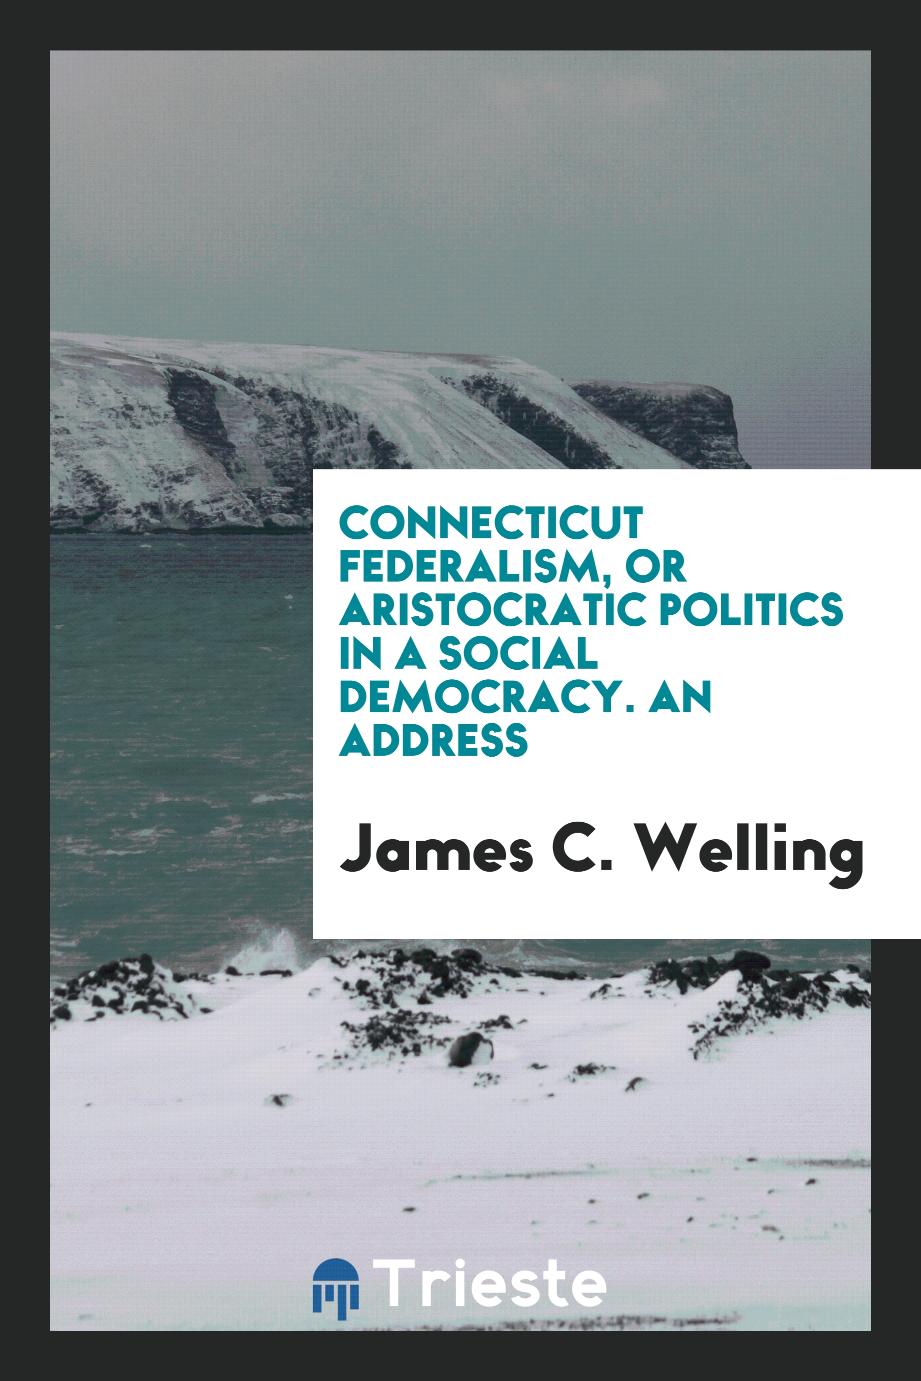 Connecticut Federalism, Or Aristocratic Politics in a Social Democracy. An Address